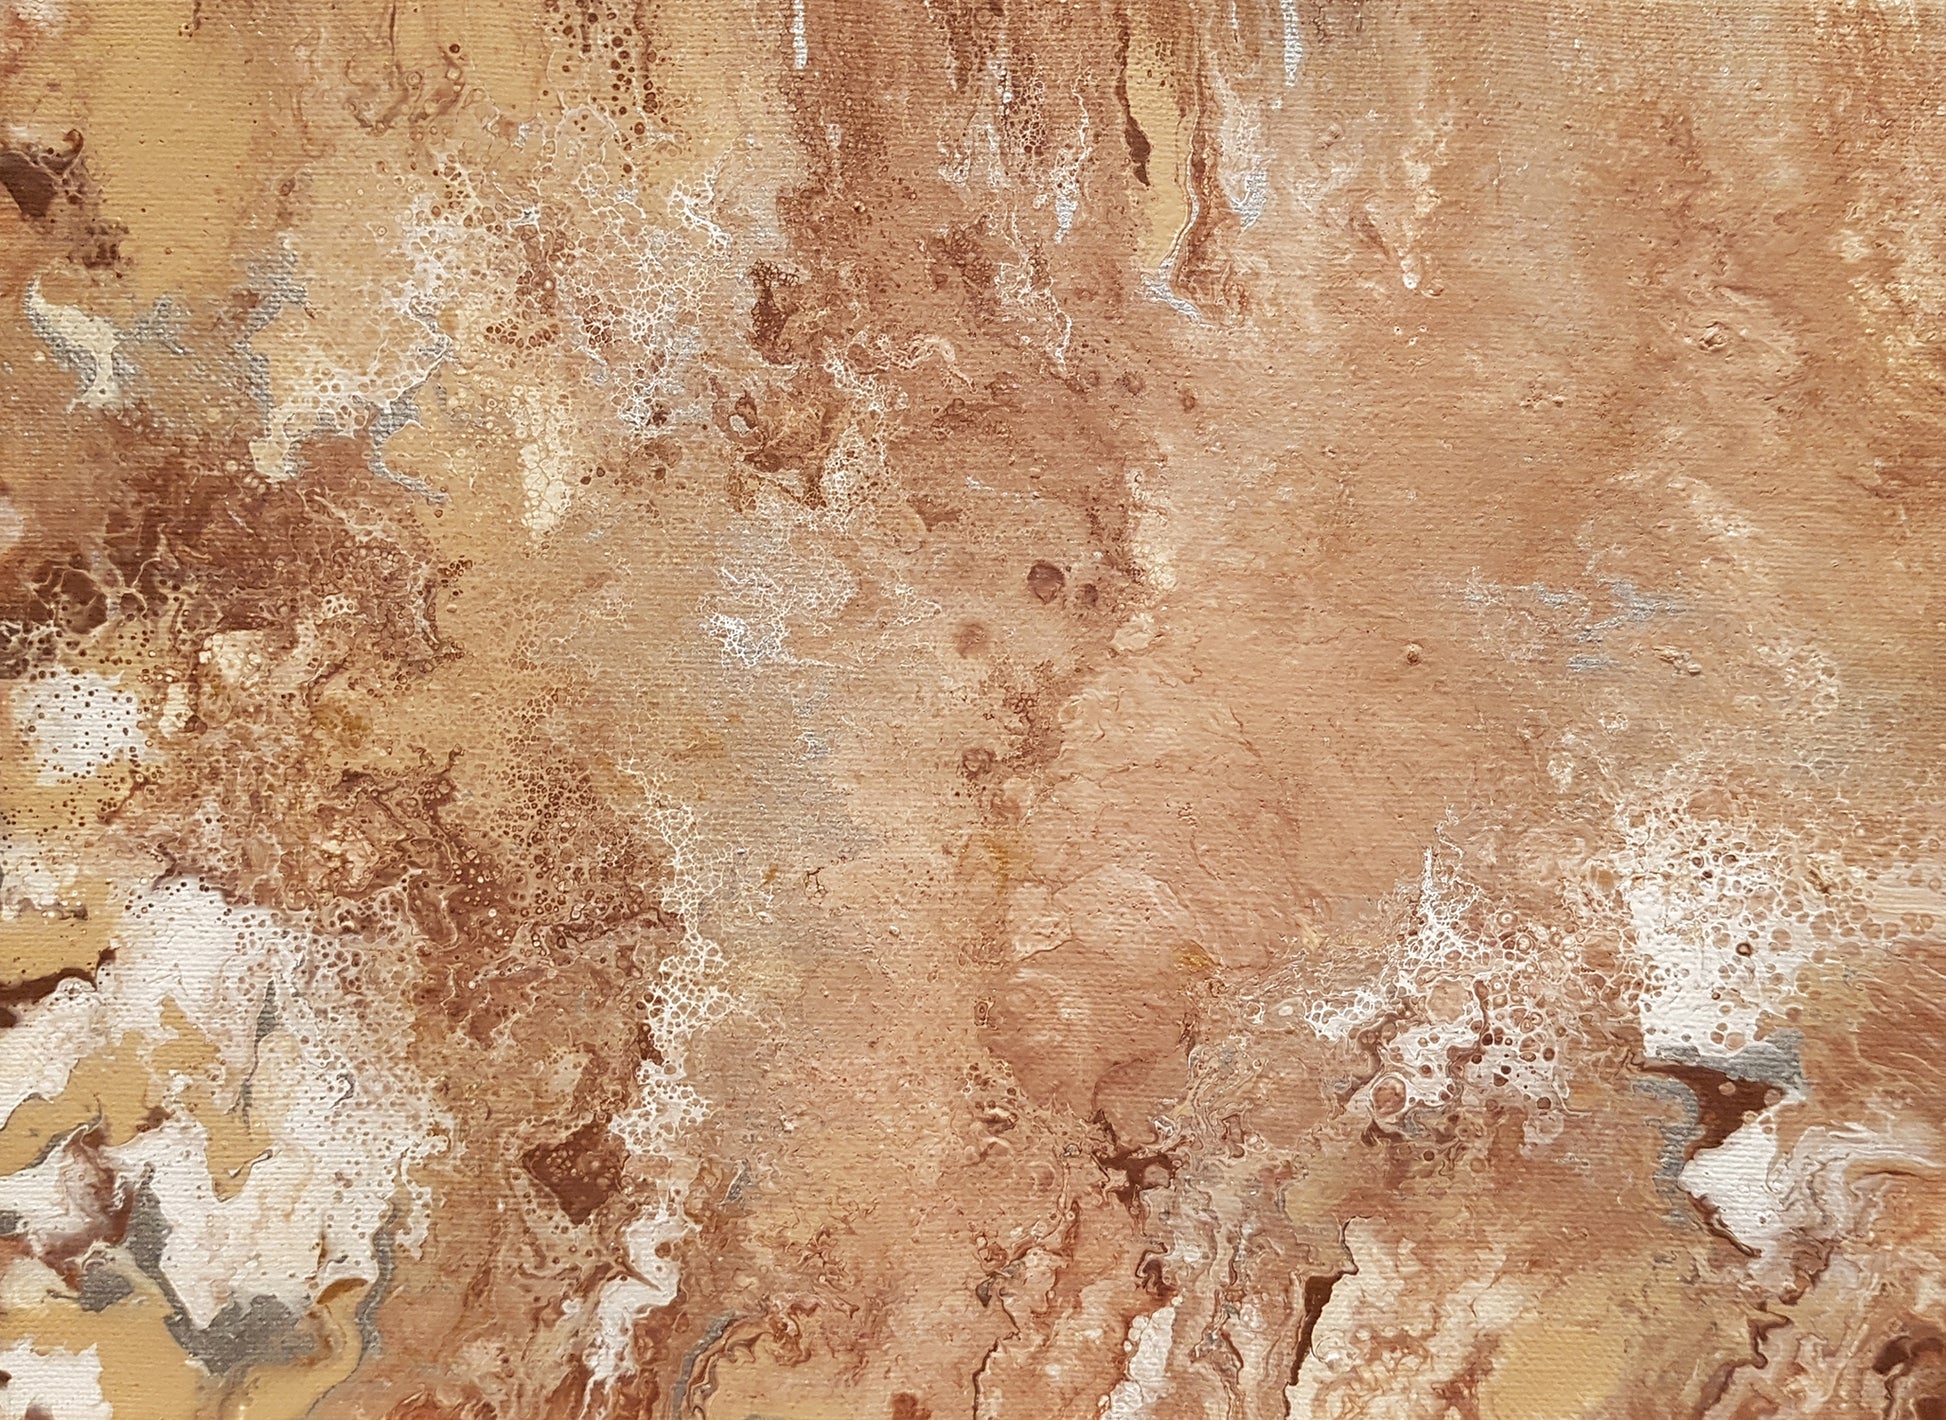 Barren-Lands-by-Alexandra-Romano-Art-Beige-Sandy-Brown-Earth-Tone-Colors-Painting-Abstract-Expressionism-Art-Gallery-Toronto-Canada